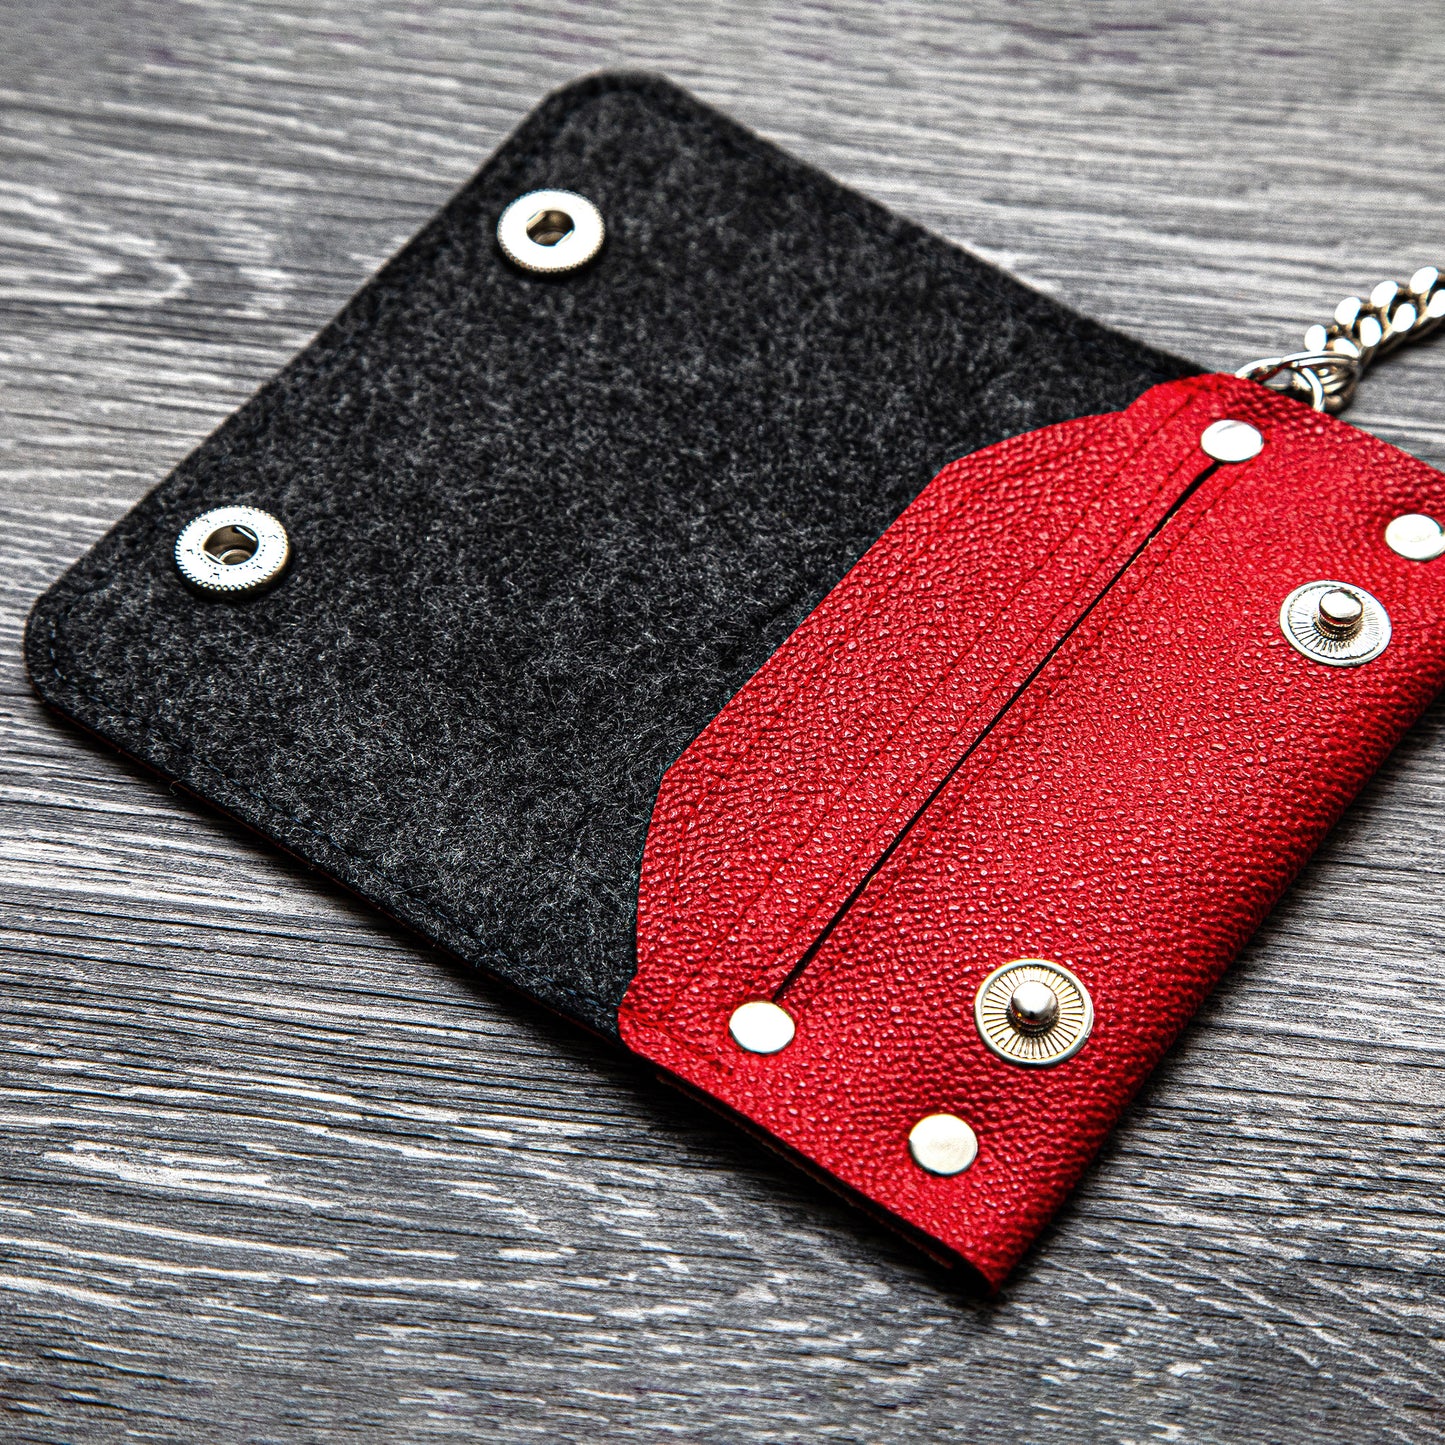 Handcrafted Biker Wallet with Detachable Chain - Cruelty-Free and Fashionably Functional - Red Faux Leather